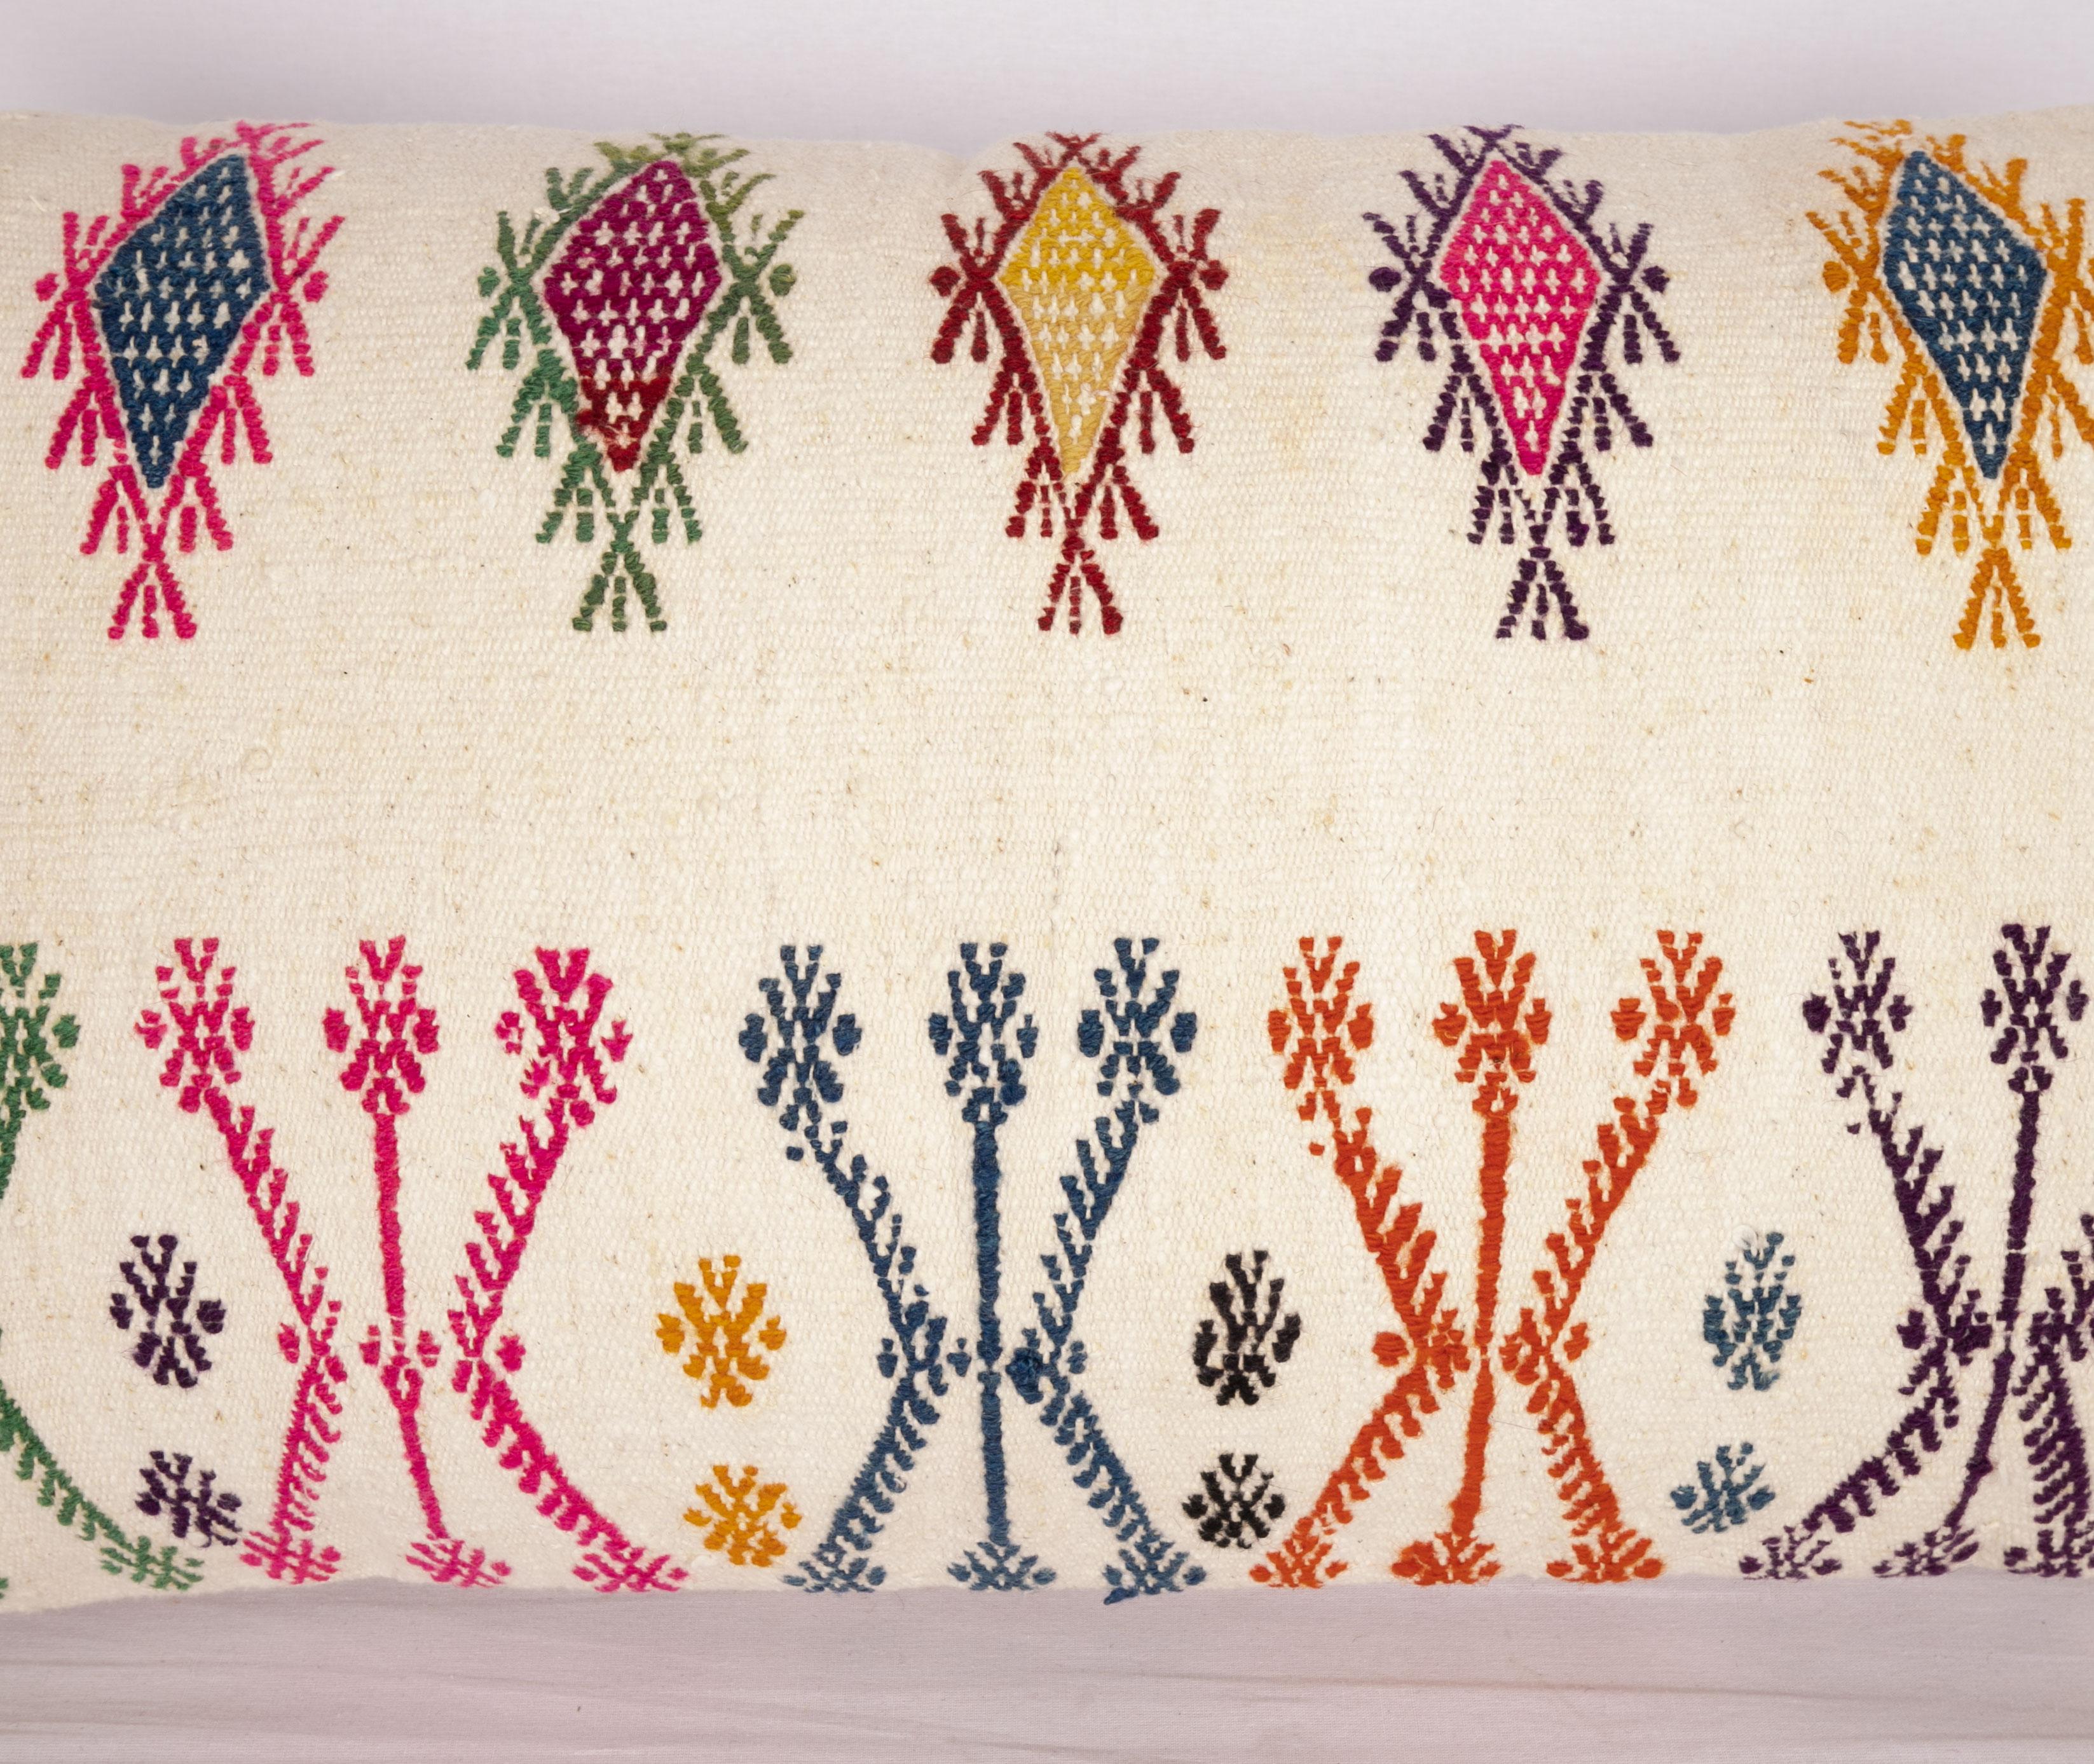 Hand-Woven Old Pillow Case Made from a Sothern Anatolian Cicim Kilim, Mid-20th Century